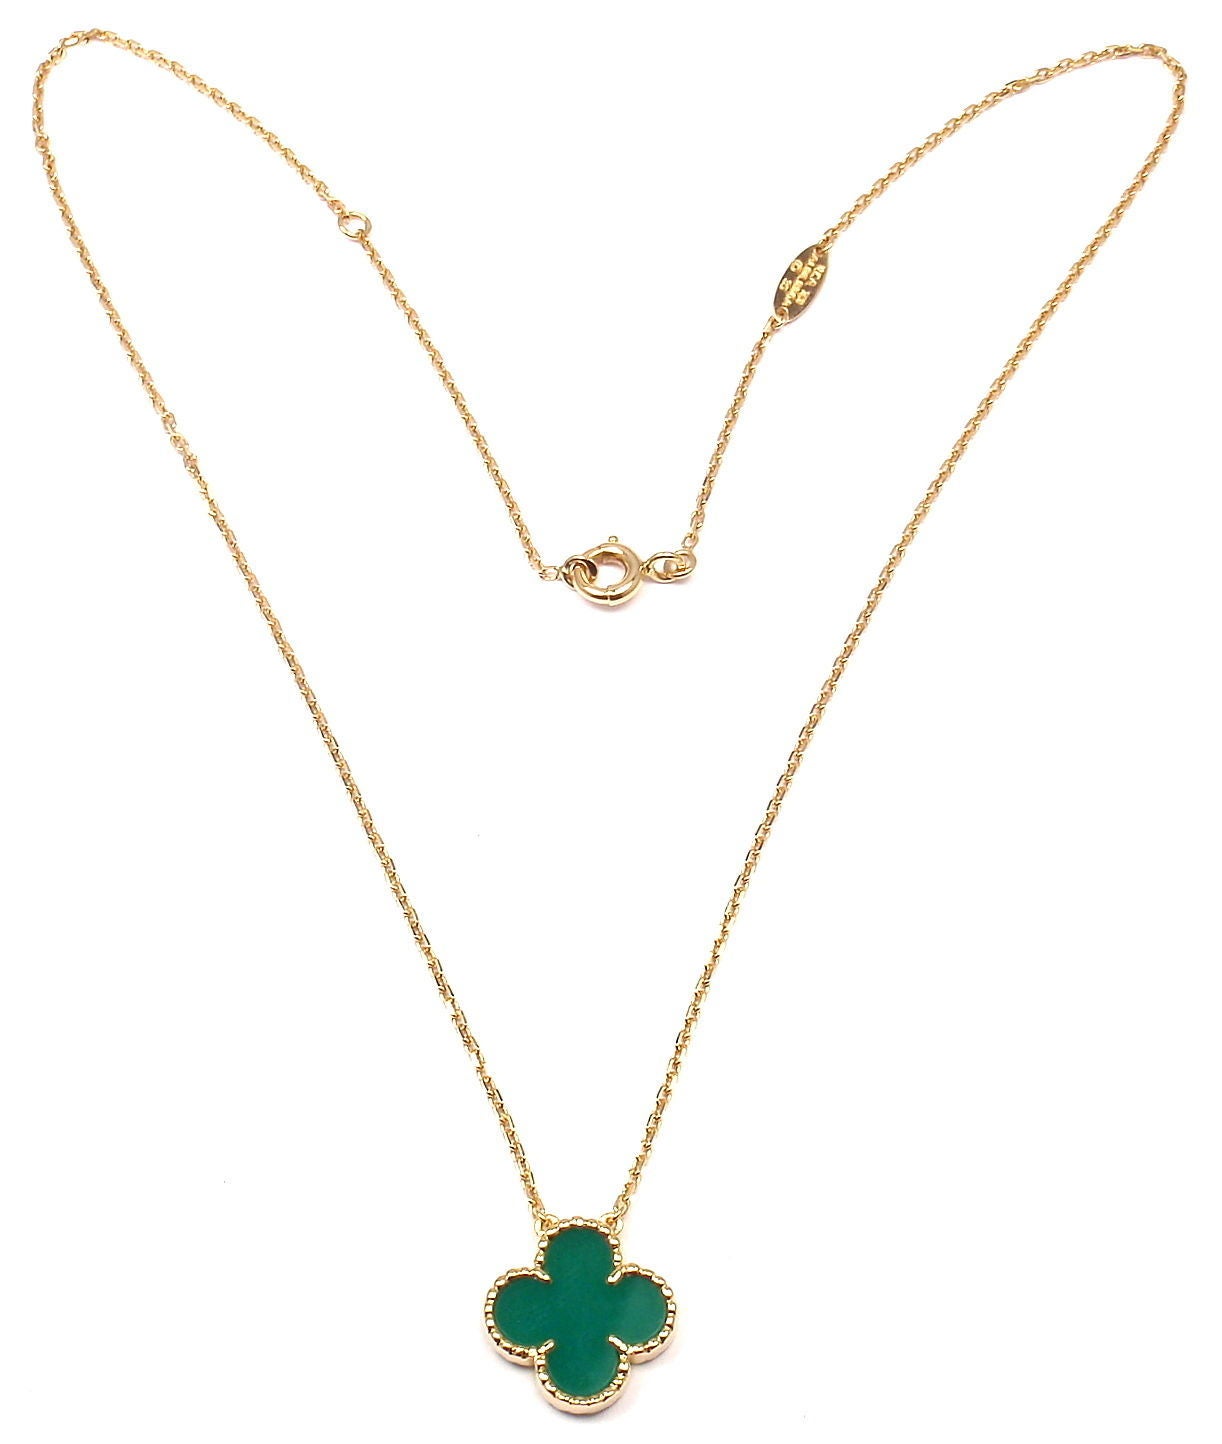 18k Yellow Gold Vintage Alhambra Green Agate Necklace by Van Cleef & Arpels. 
With 1 green agate stone: 15mm. 
This necklace comes with Van Cleef & Arpels paper.

Details: 
Length: 16